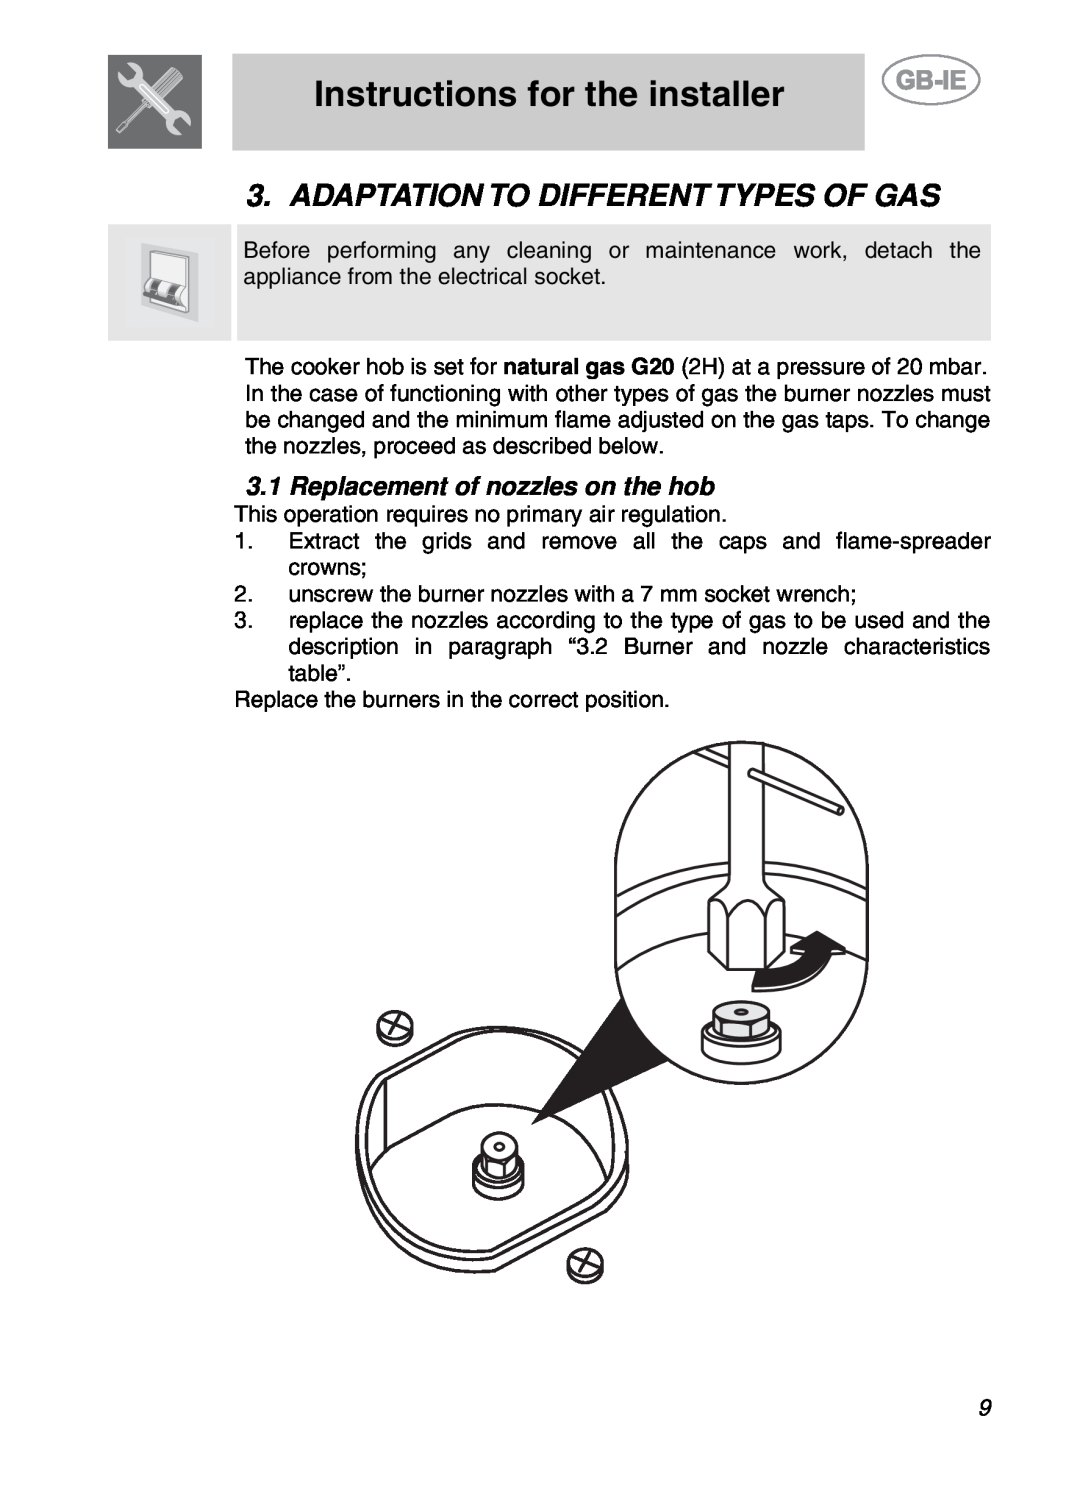 Smeg A2EA manual Adaptation To Different Types Of Gas, 3.1Replacement of nozzles on the hob, Instructions for the installer 